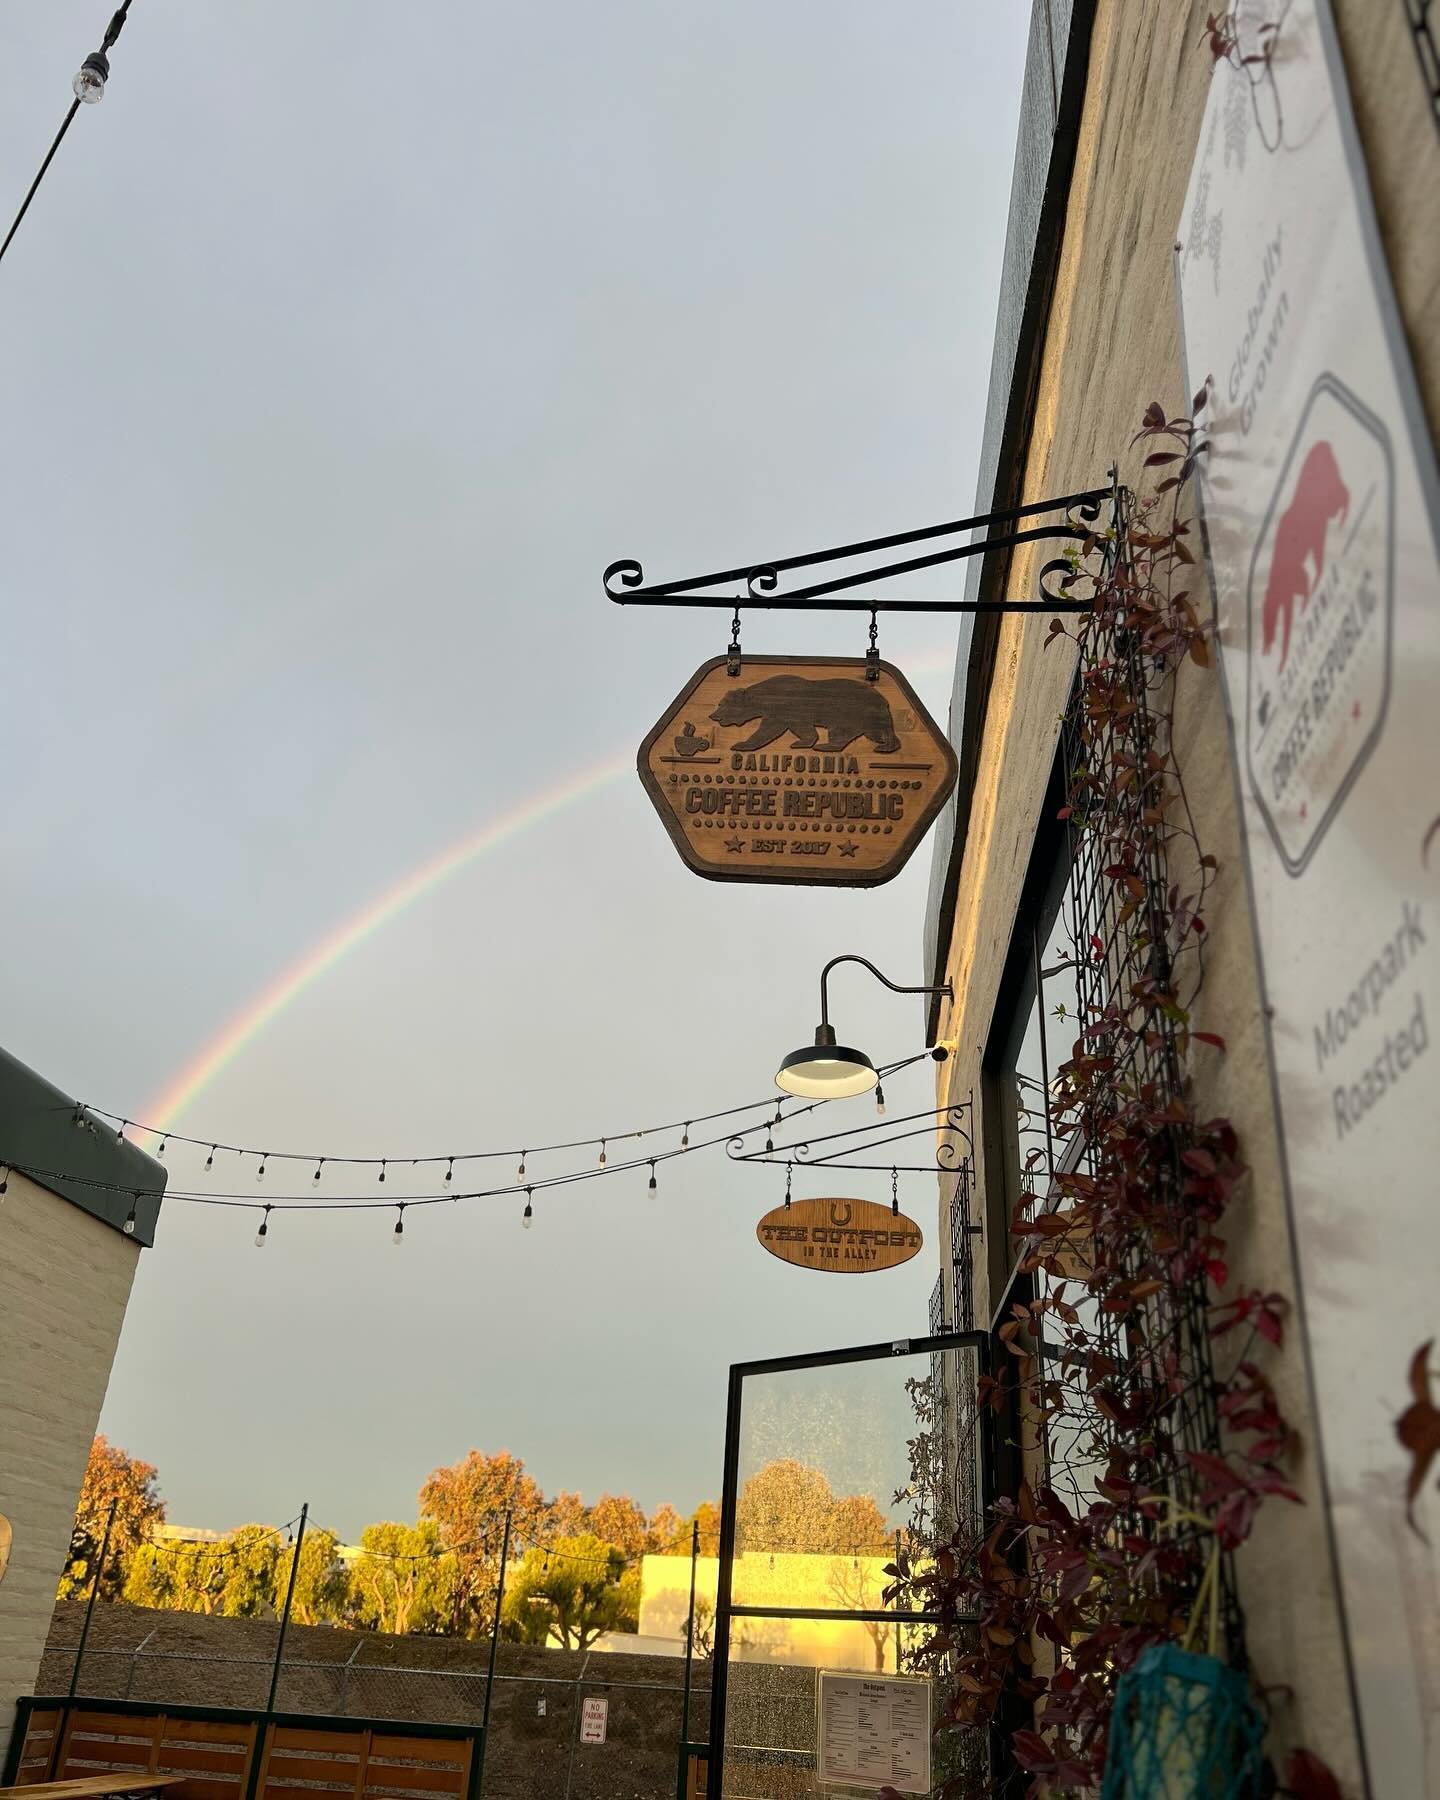 A beautiful sign for what lies ahead, just a heads up we will be closing at 8pm, due to weather, see everyone tomorrow.